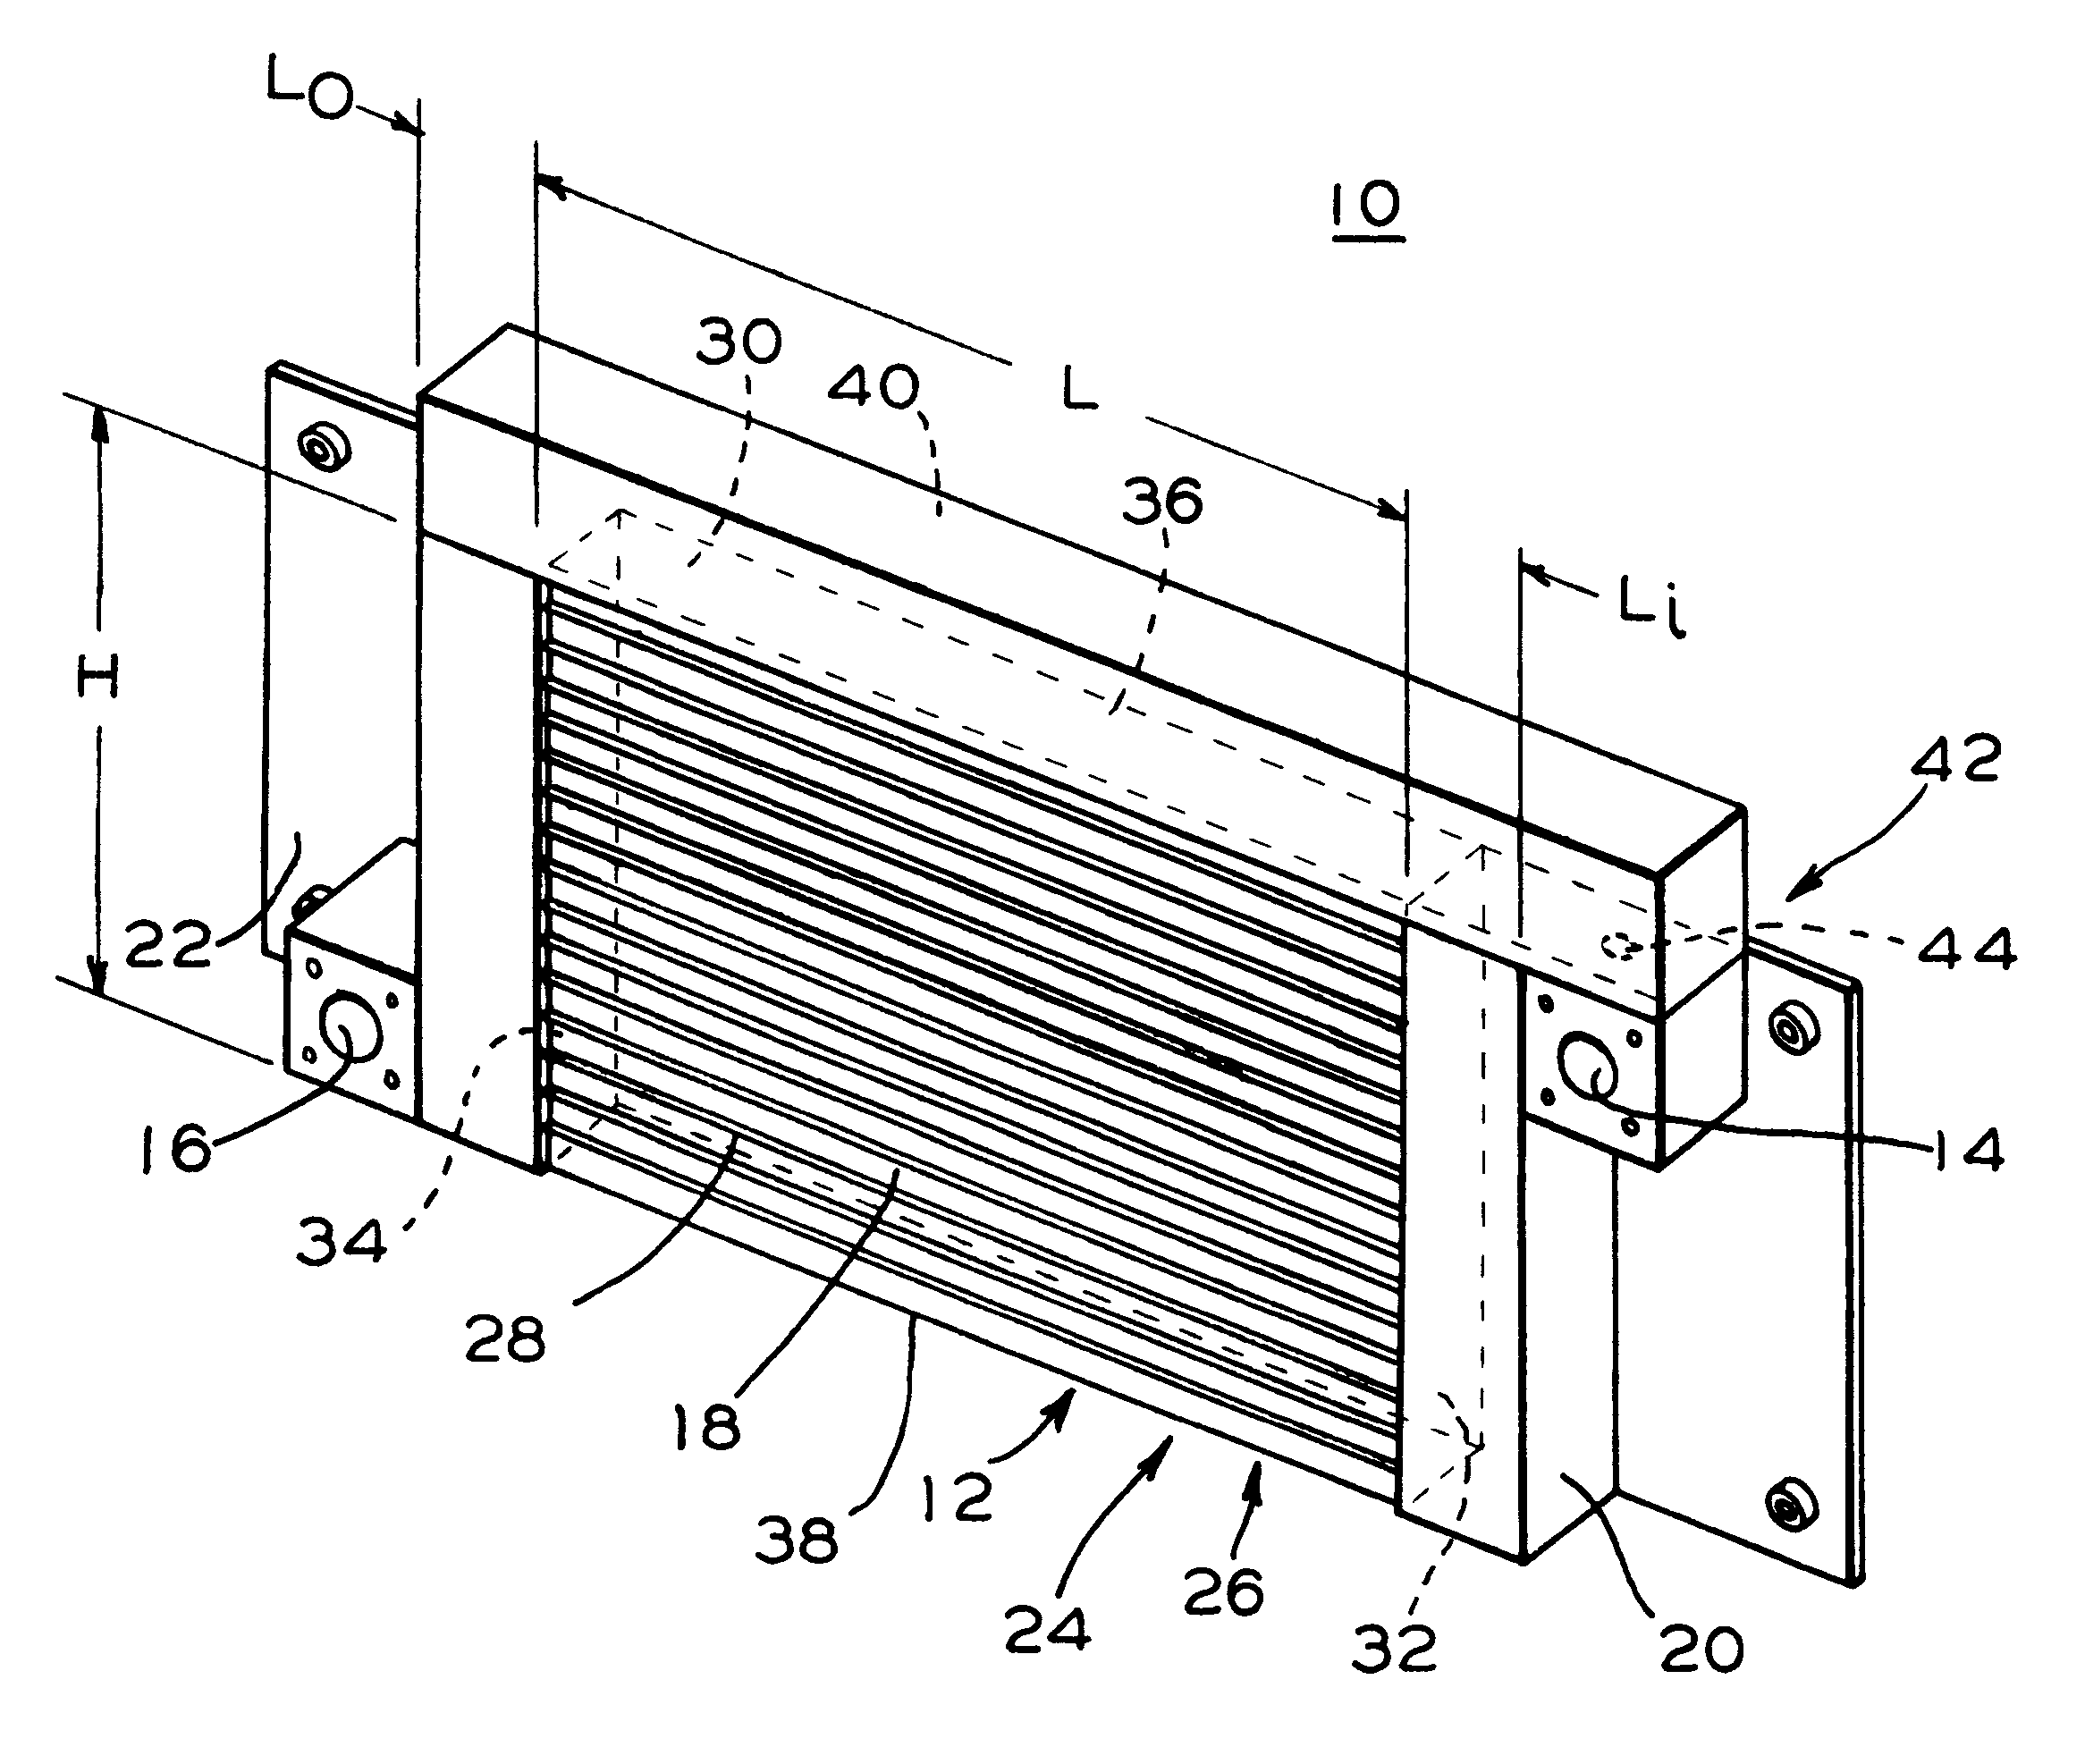 Aftercooler having bypass passage integrally formed therewith